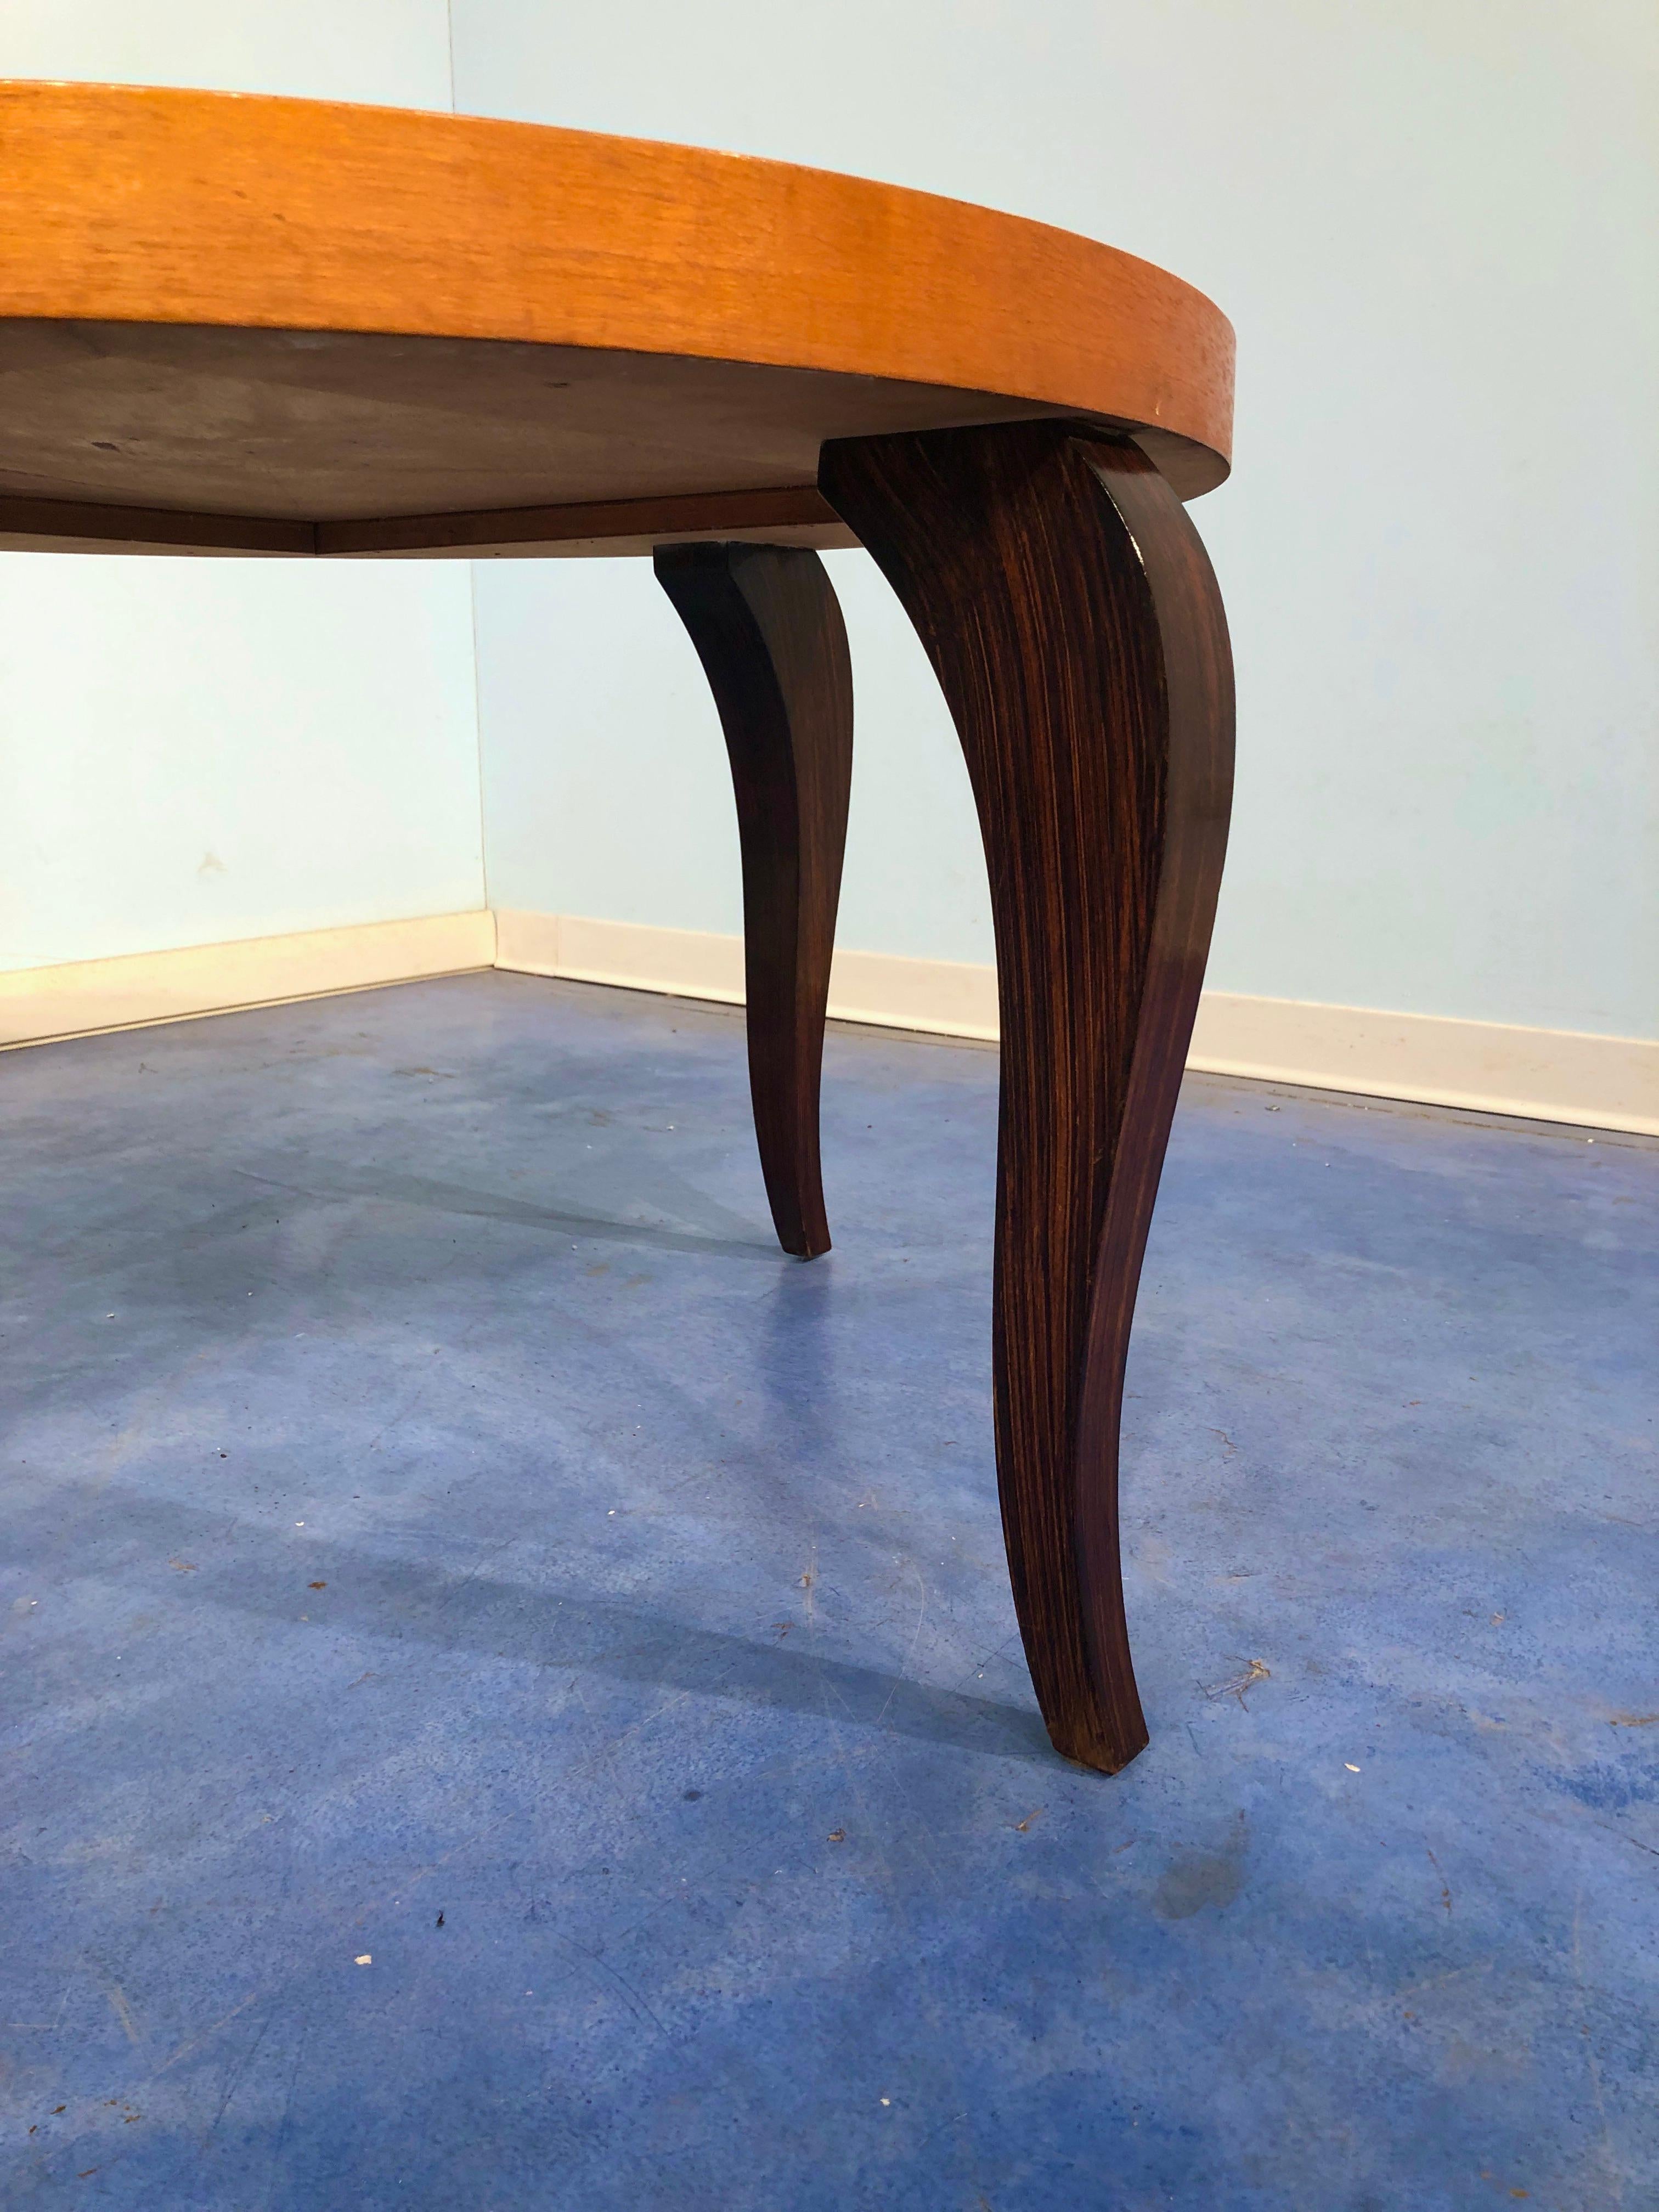 French Art Deco Maple Coffee Table, 1940s In Good Condition For Sale In Traversetolo, IT